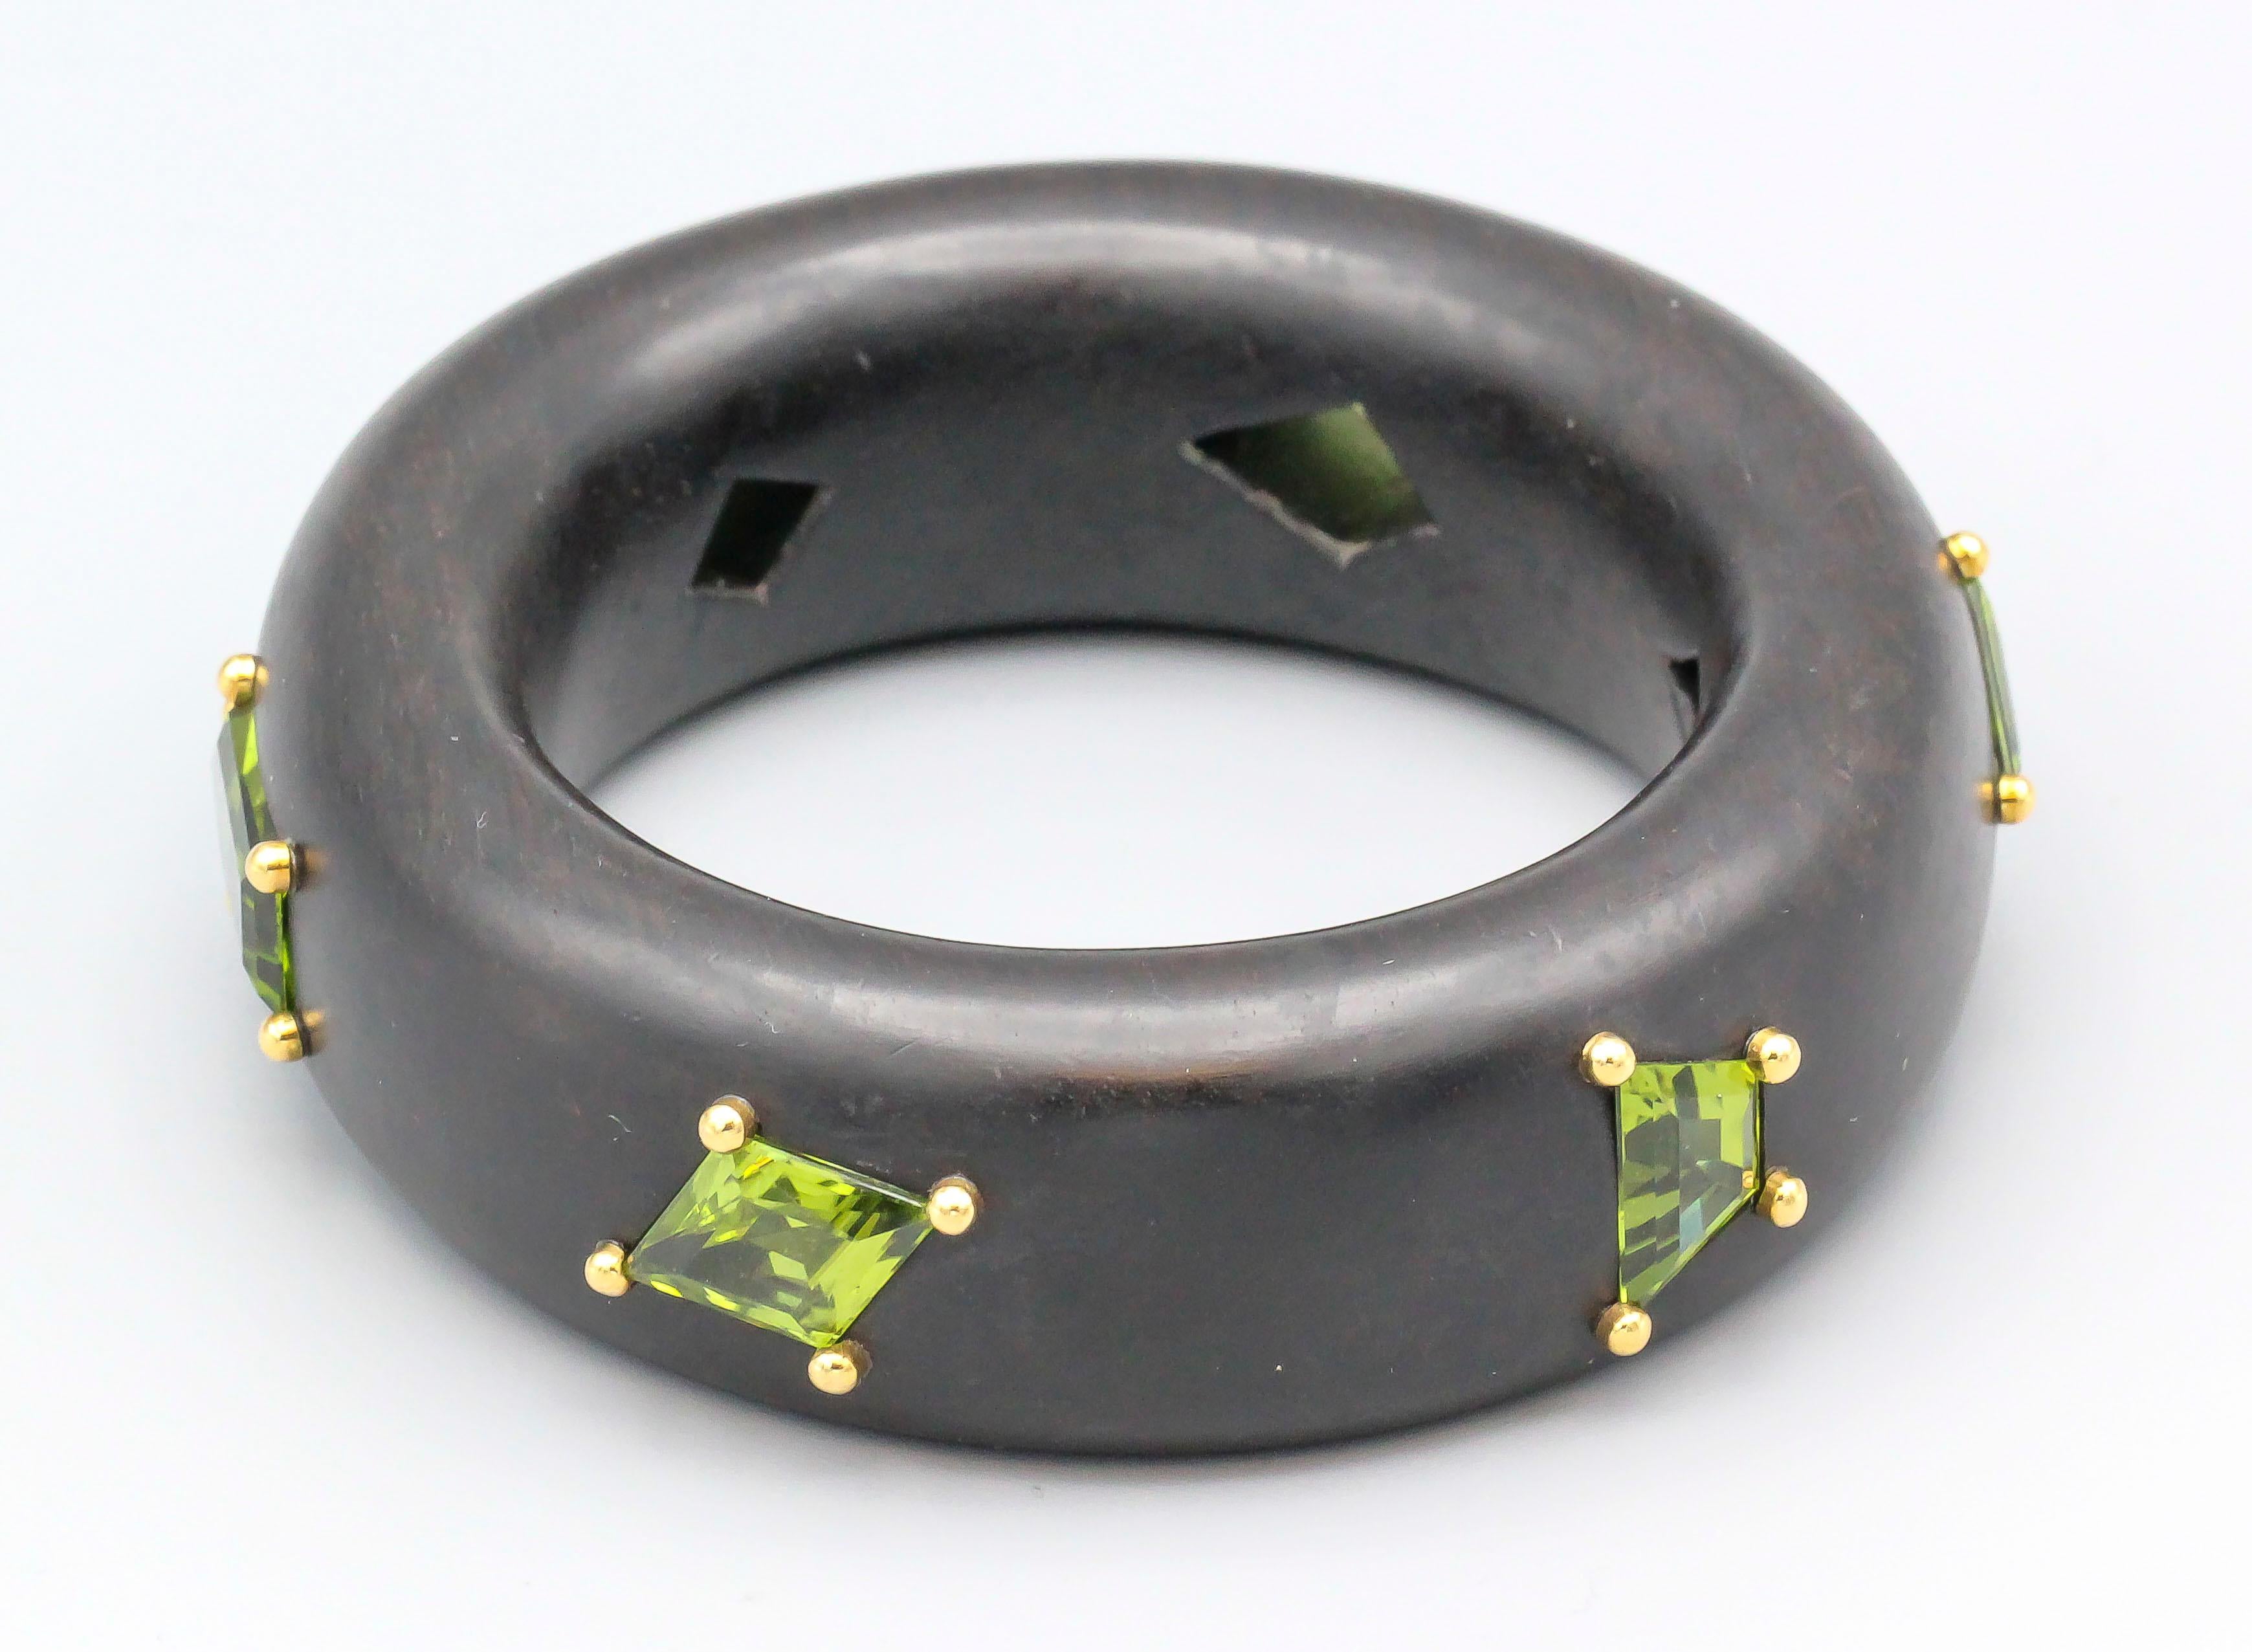 Fine bangle bracelet made in ebony wood and set with mixed cut peridots and 18k gold.  Medium size will fit a 6.5 inch wrist.